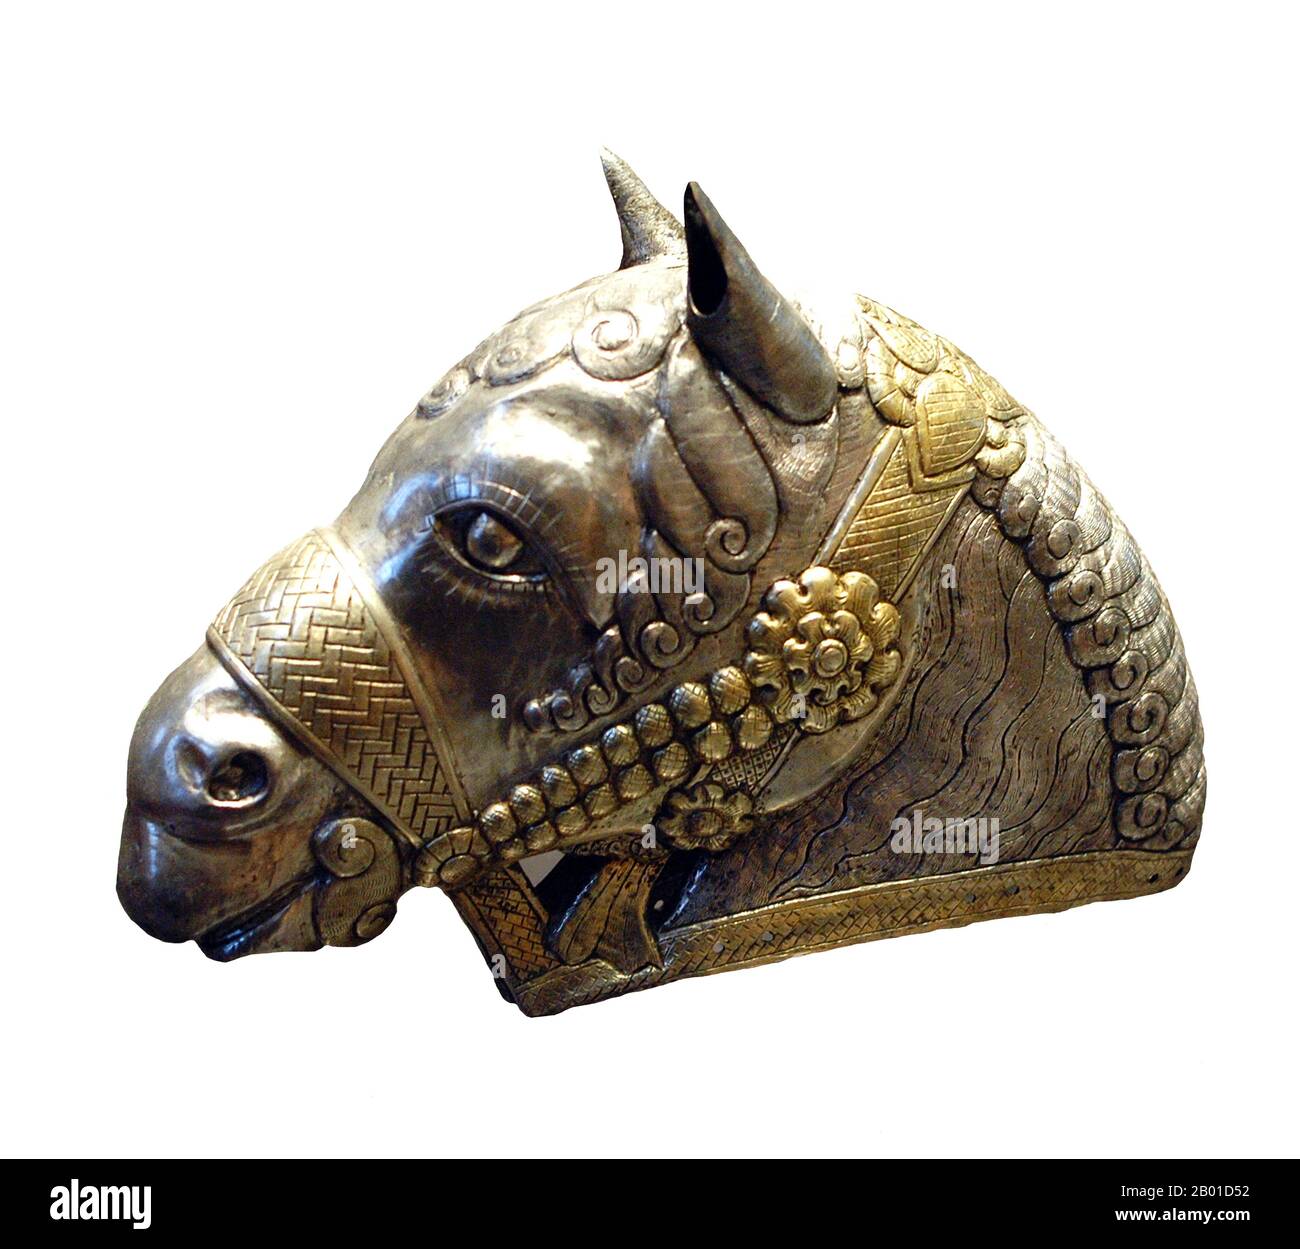 Iran: A horse head in gilded silver found at Kerman, Sassanian Persia, 4th century CE.  The Sassanid Empire (also spelled Sasanid Empire, Sassanian Empire or Sasanian Empire), known to its inhabitants as Ērānshahr in Middle Persian and resulting in the New Persian terms Iranshahr and Iran, was the last pre-Islamic Persian Empire, ruled by the Sasanian Dynasty from 224 to 651. The empire, succeeding the Parthian Empire, was recognised as one of the two main powers in Western Asia and Europe, alongside the Roman Empire and its successor, the Byzantine Empire, for a period of over 400 years. Stock Photo